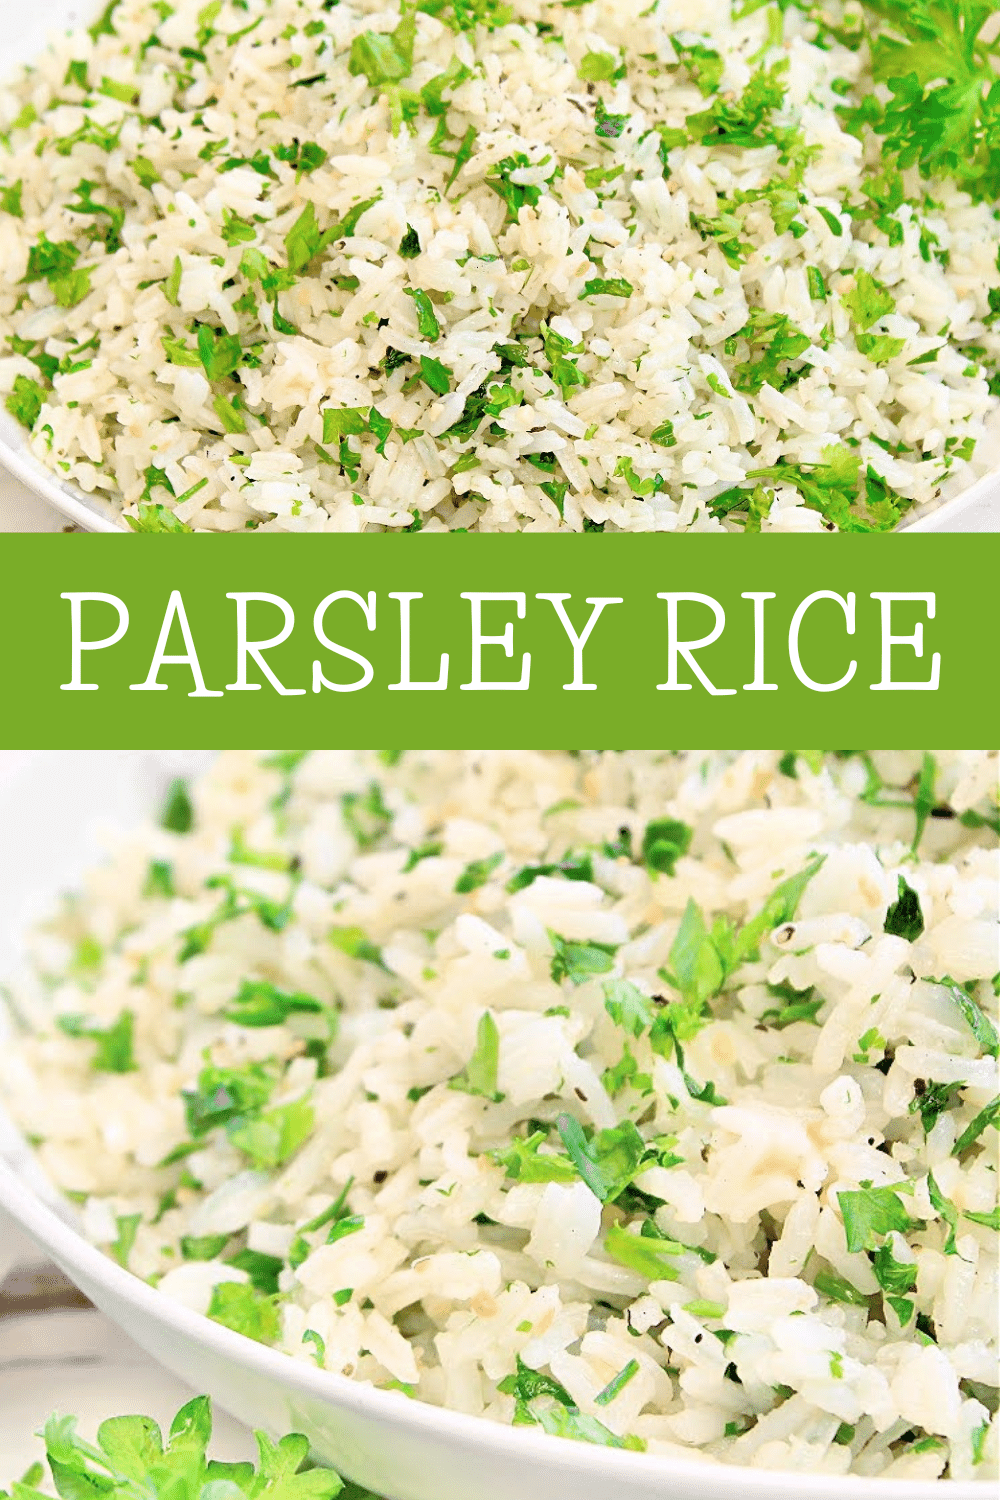 Parsley Rice ~ An easy and versatile side dish made with fresh parsley and garlic butter! Pairs well with a variety of cuisines. via @thiswifecooks